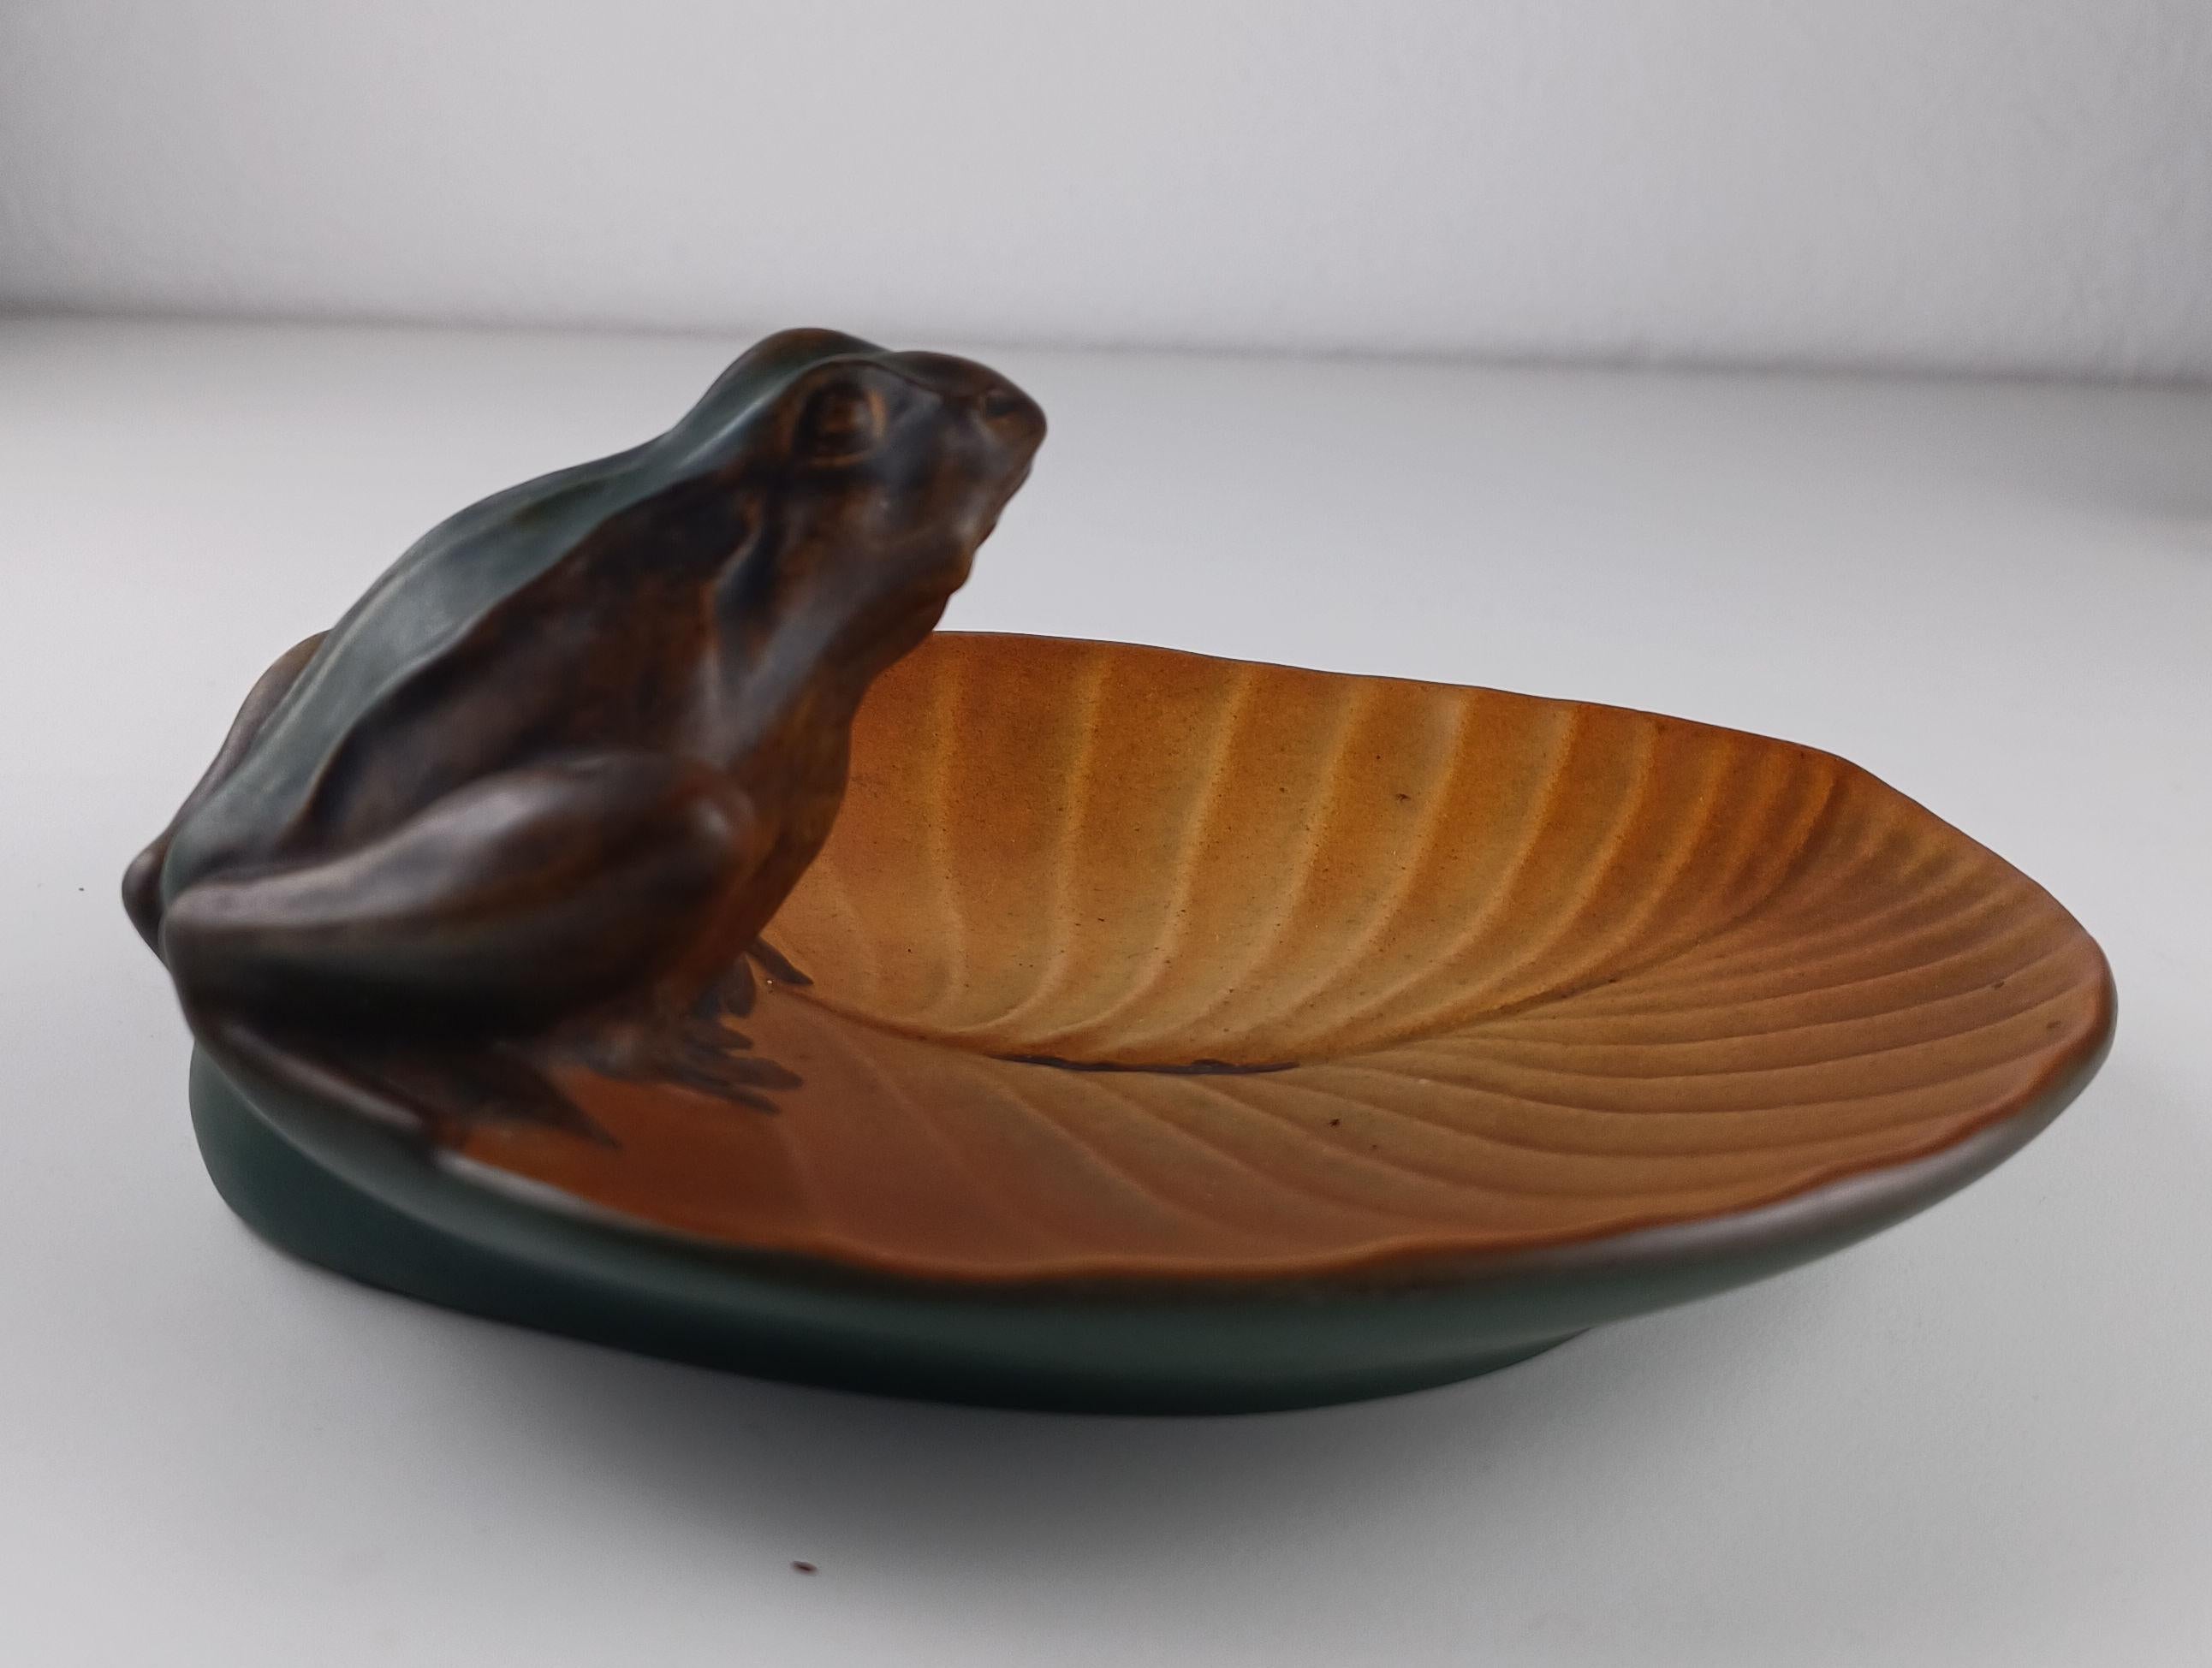 Hand-Crafted 1920's Small Handcrafed Danish Art Nouveau Handcrafted Frog Dish by Ipsens Enke For Sale